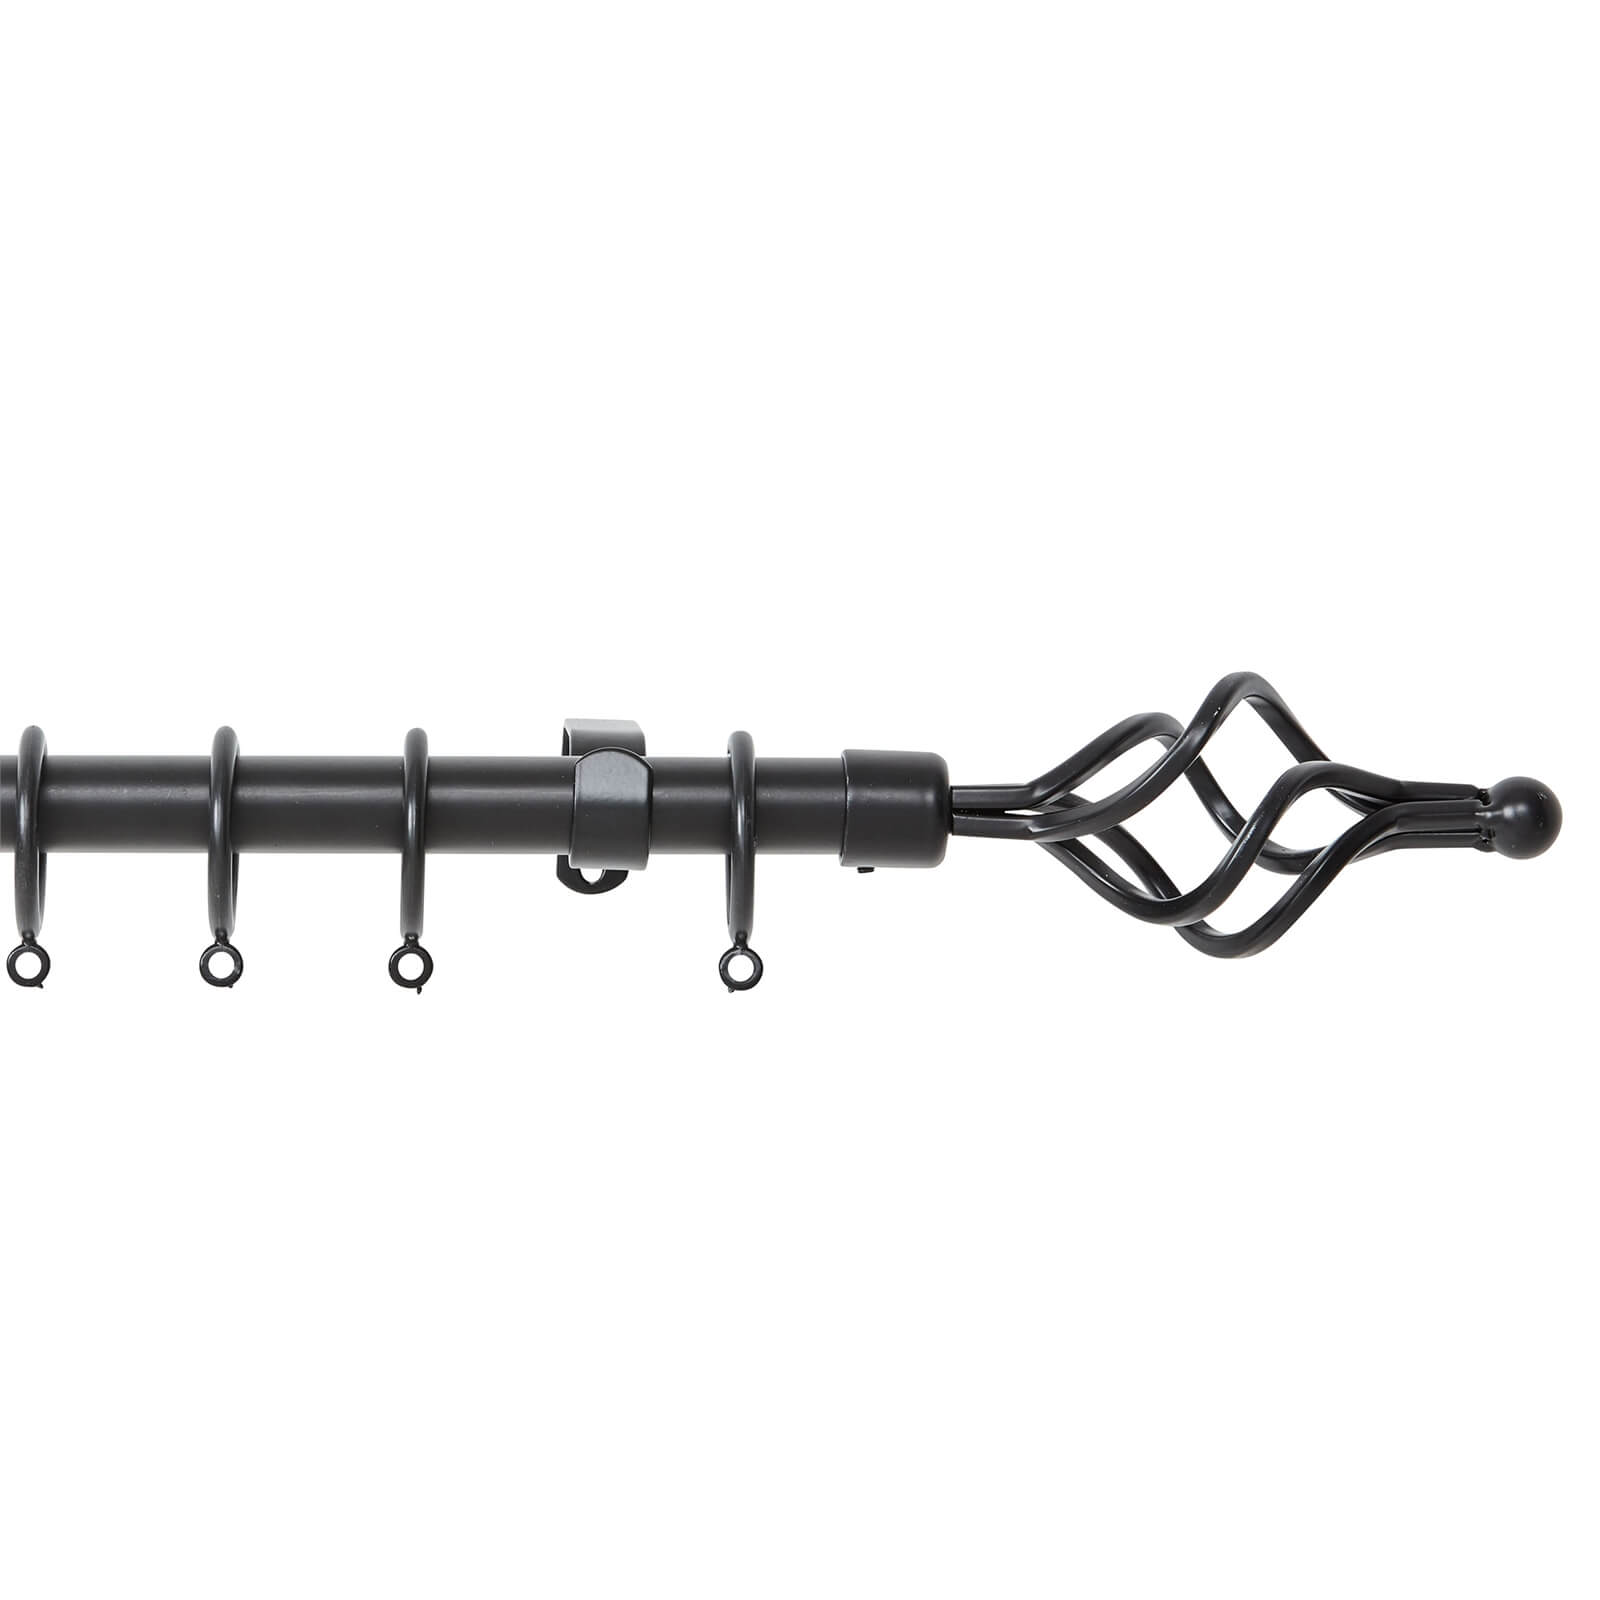 Photo of Extendable Cage Finial Curtain Pole - Black - 1.7-3m -16/19mm-